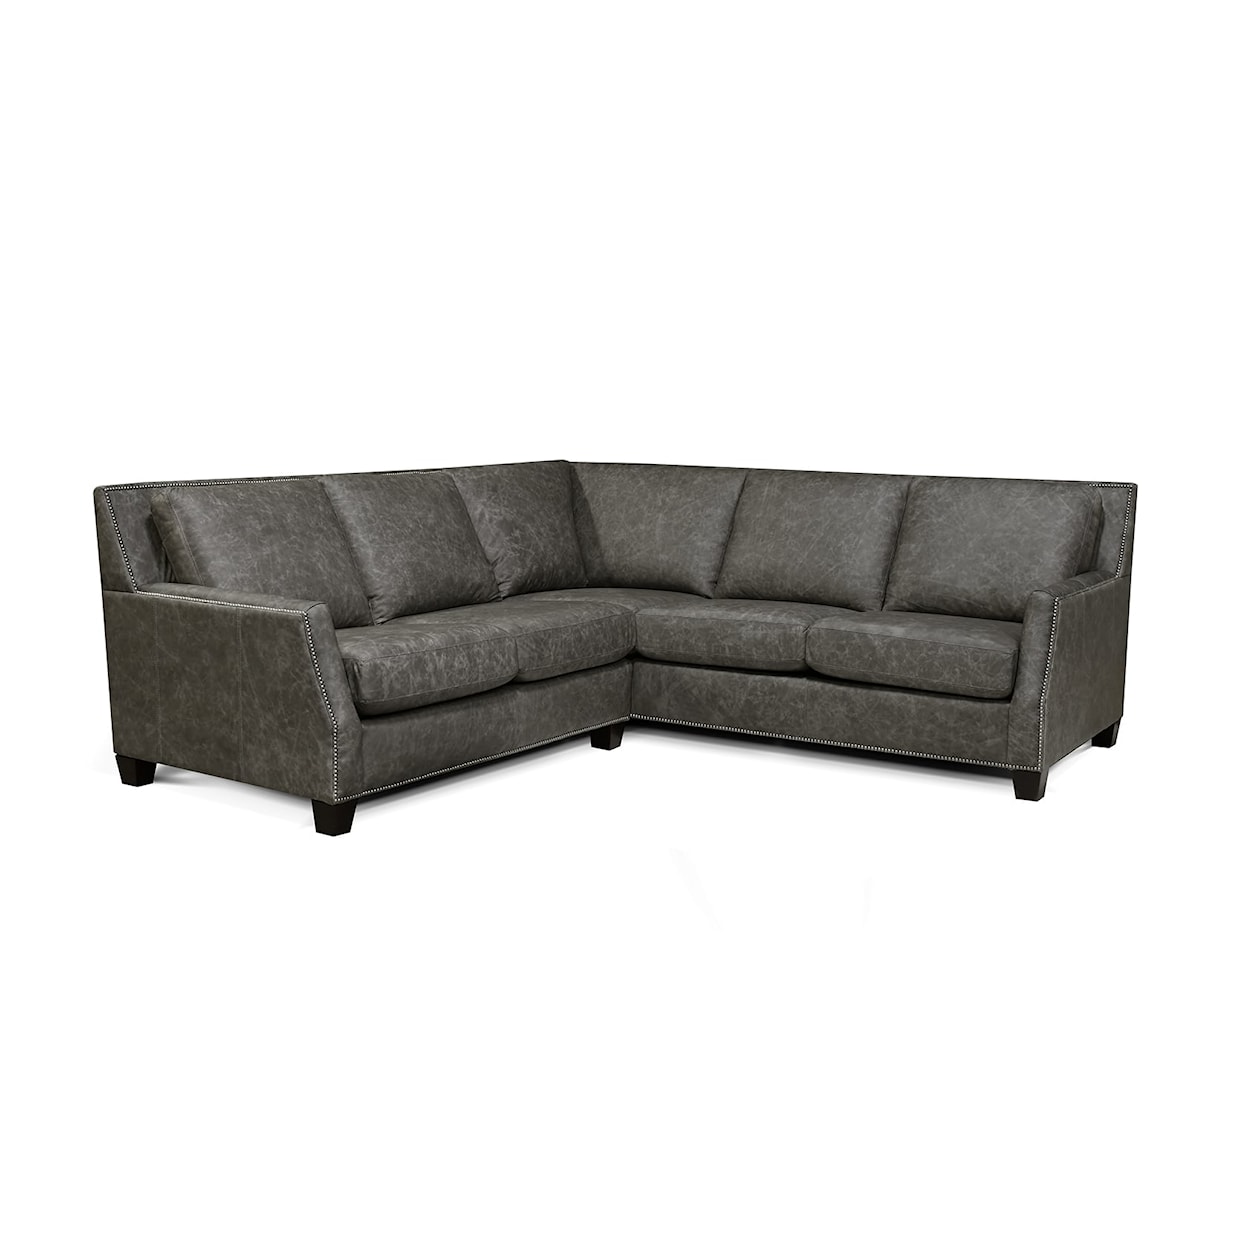 England 3G00/AL/N Series 2-Piece Leather Sectional Sofa